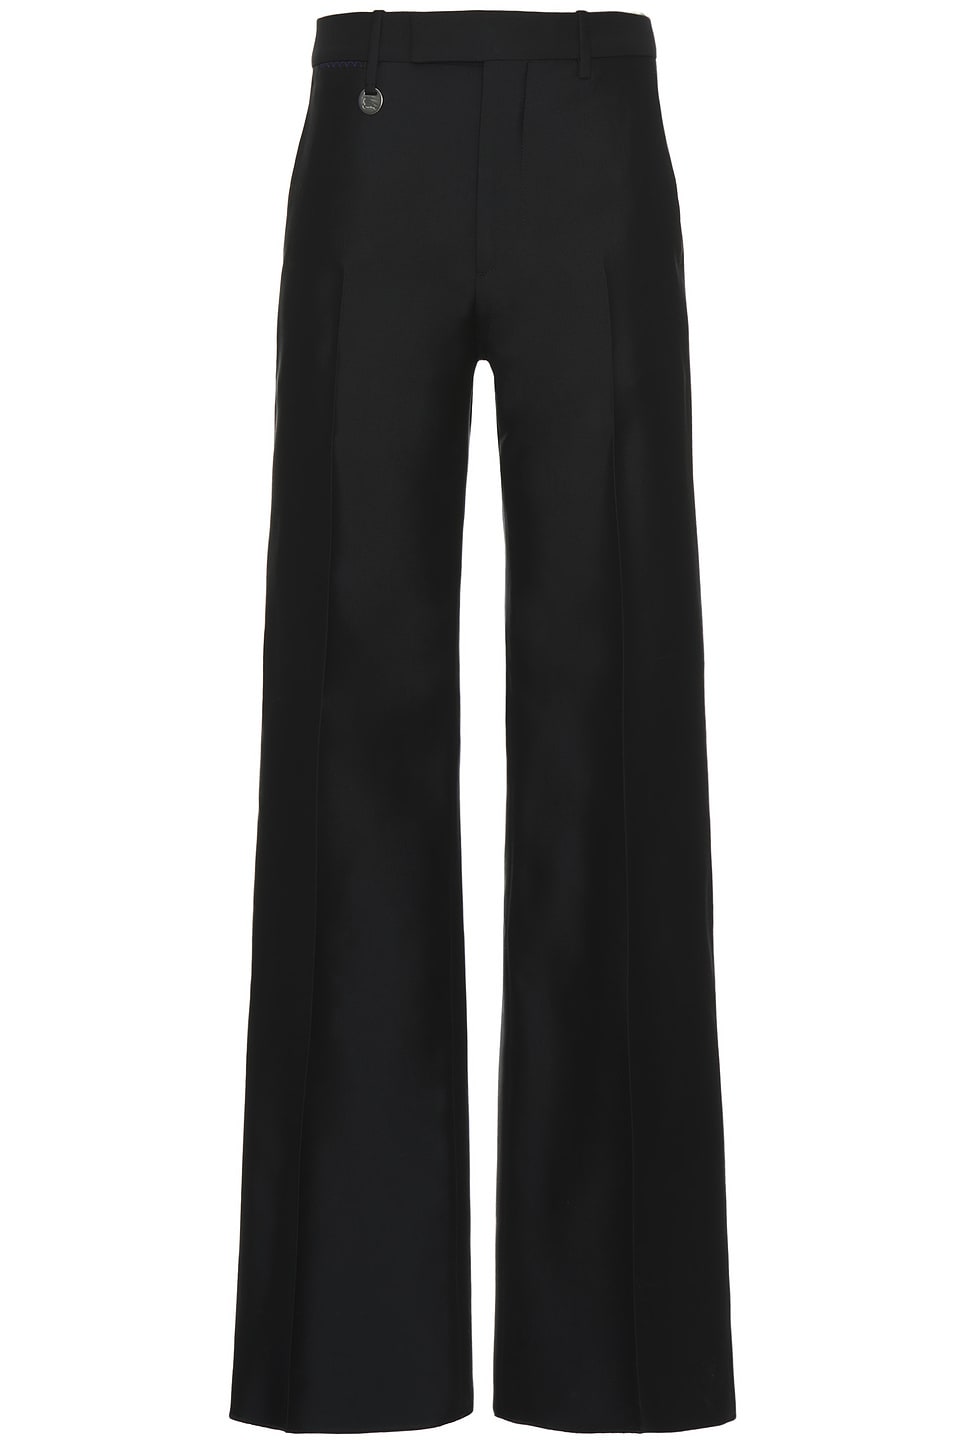 Image 1 of Burberry Trouser in Black